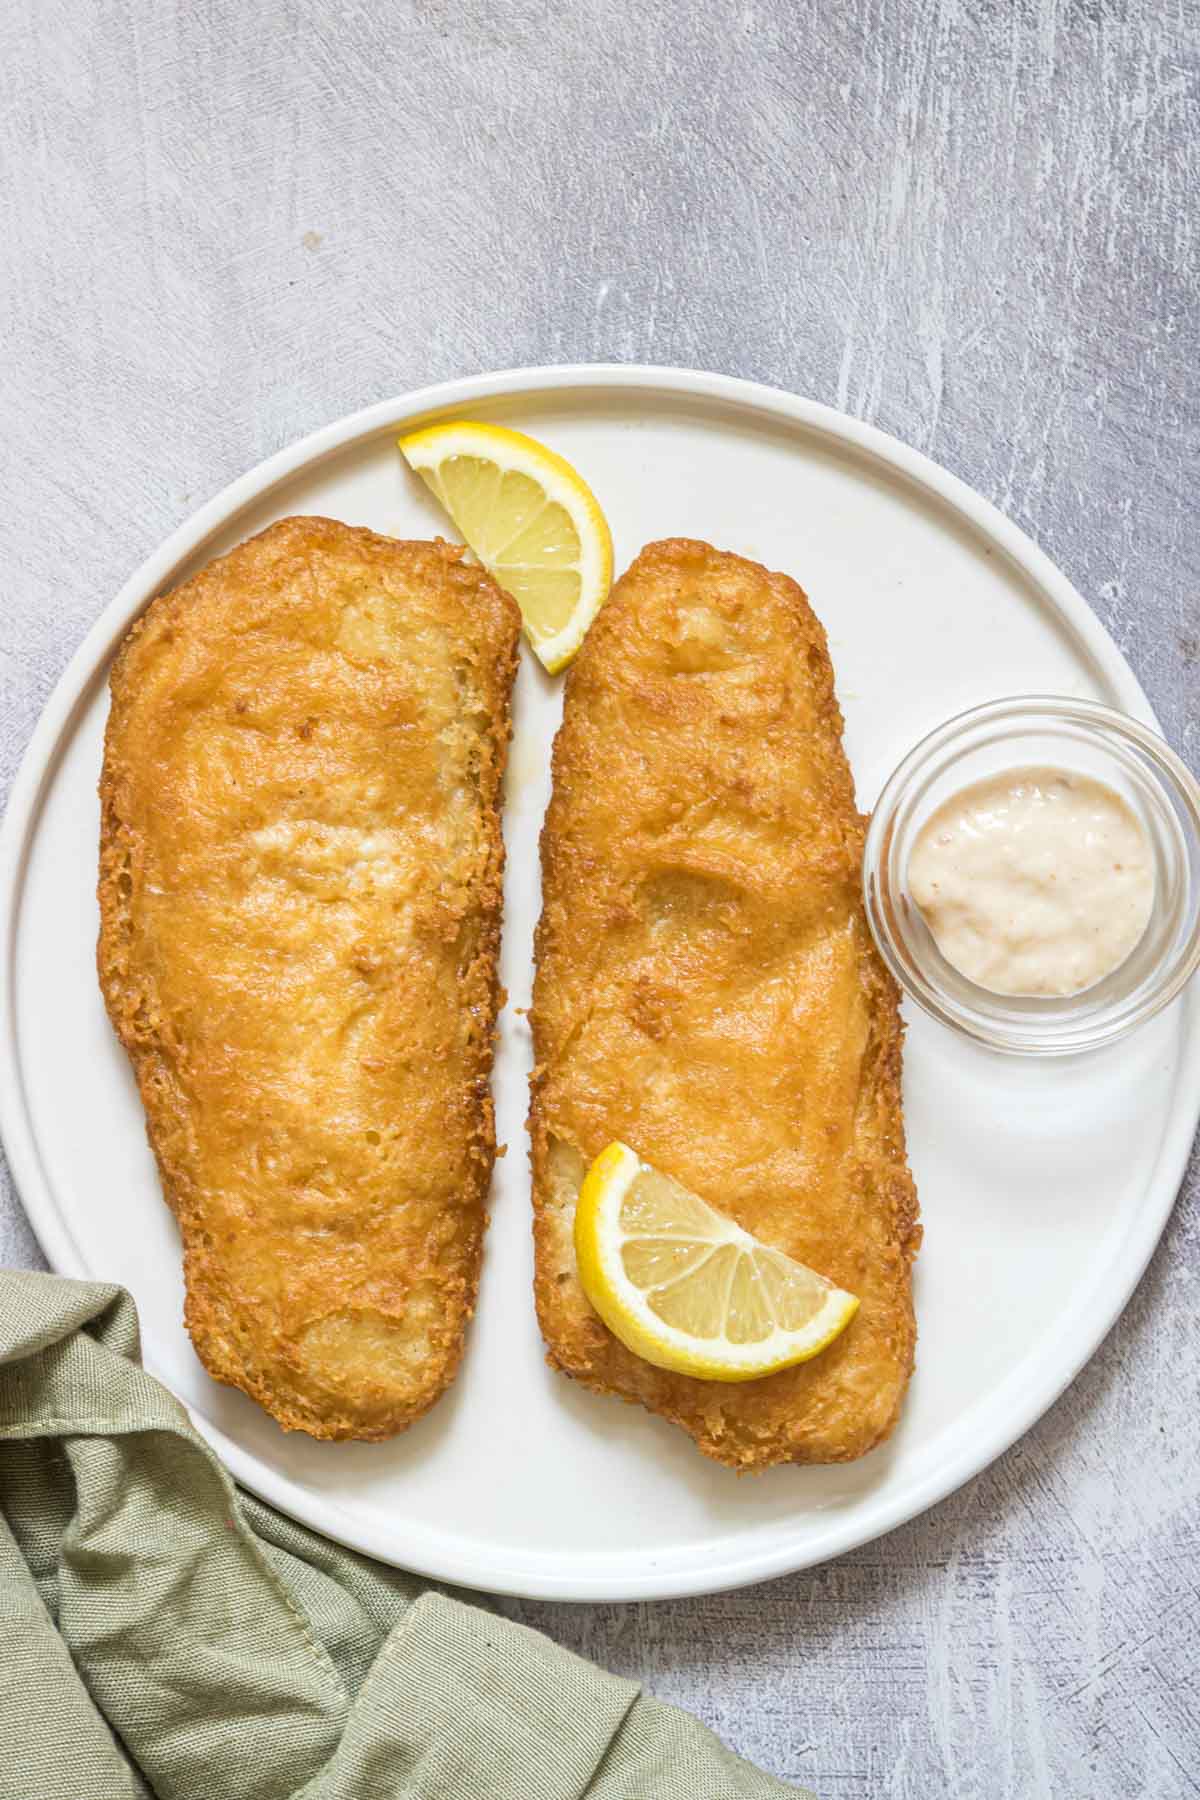 Reheat Fried Fish in Air Fryer - Recipes From A Pantry